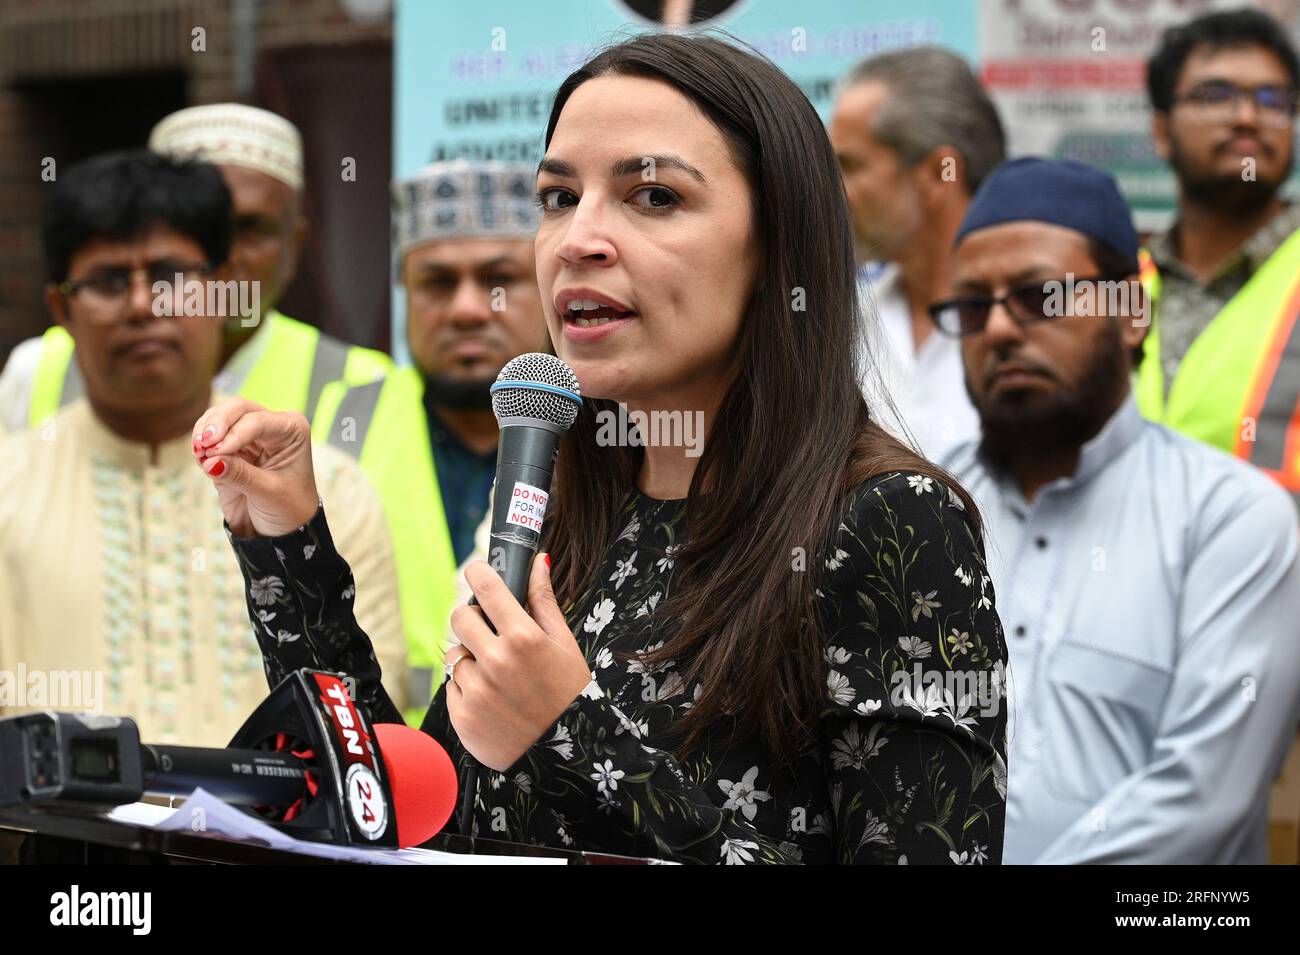 New York, USA. 04th Aug, 2023. Rep. Alexandria Ocasio-Cortez speaks before distributing food to people suffering from food insecurities at the Parkchester Islamic Center in the New York City borough of the Bronx, NY, August 4, 2023. Rep. Ocasio-Cortez outlined her efforts to increase access to halal and kosher food in the 2023 federal ‘Farm bill', as Muslim and Jewish families struggle to afford food that meets their faith's dietary guidelines. (Photo by Anthony Behar/Sipa USA) Credit: Sipa USA/Alamy Live News Stock Photo